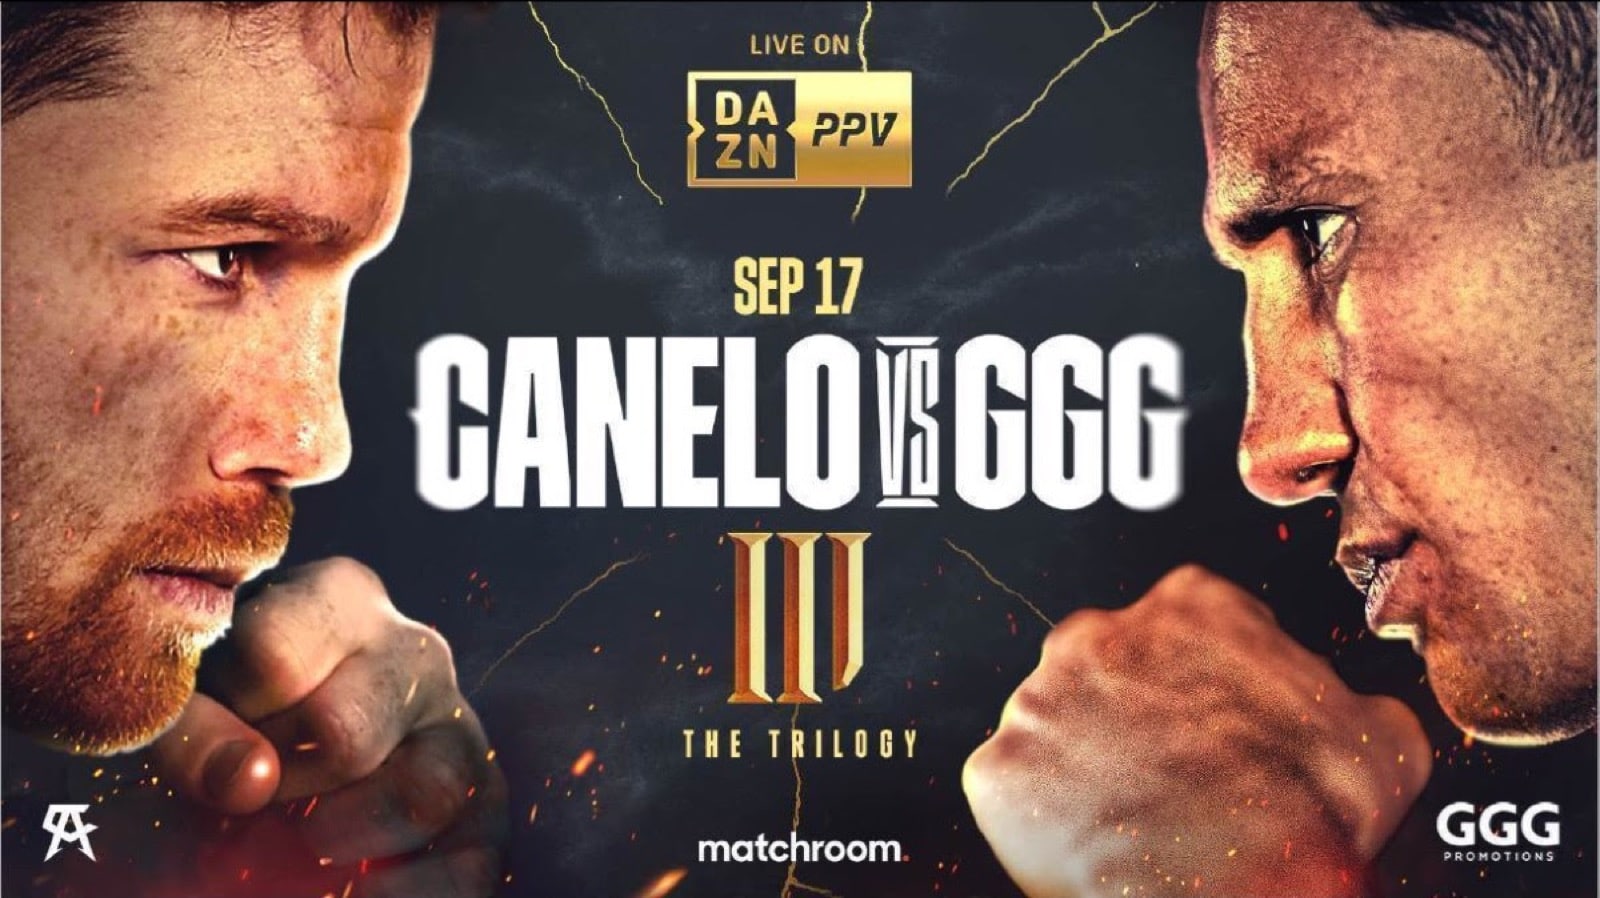 Image: Ryan Garcia expects Canelo to do well against Golovkin in trilogy